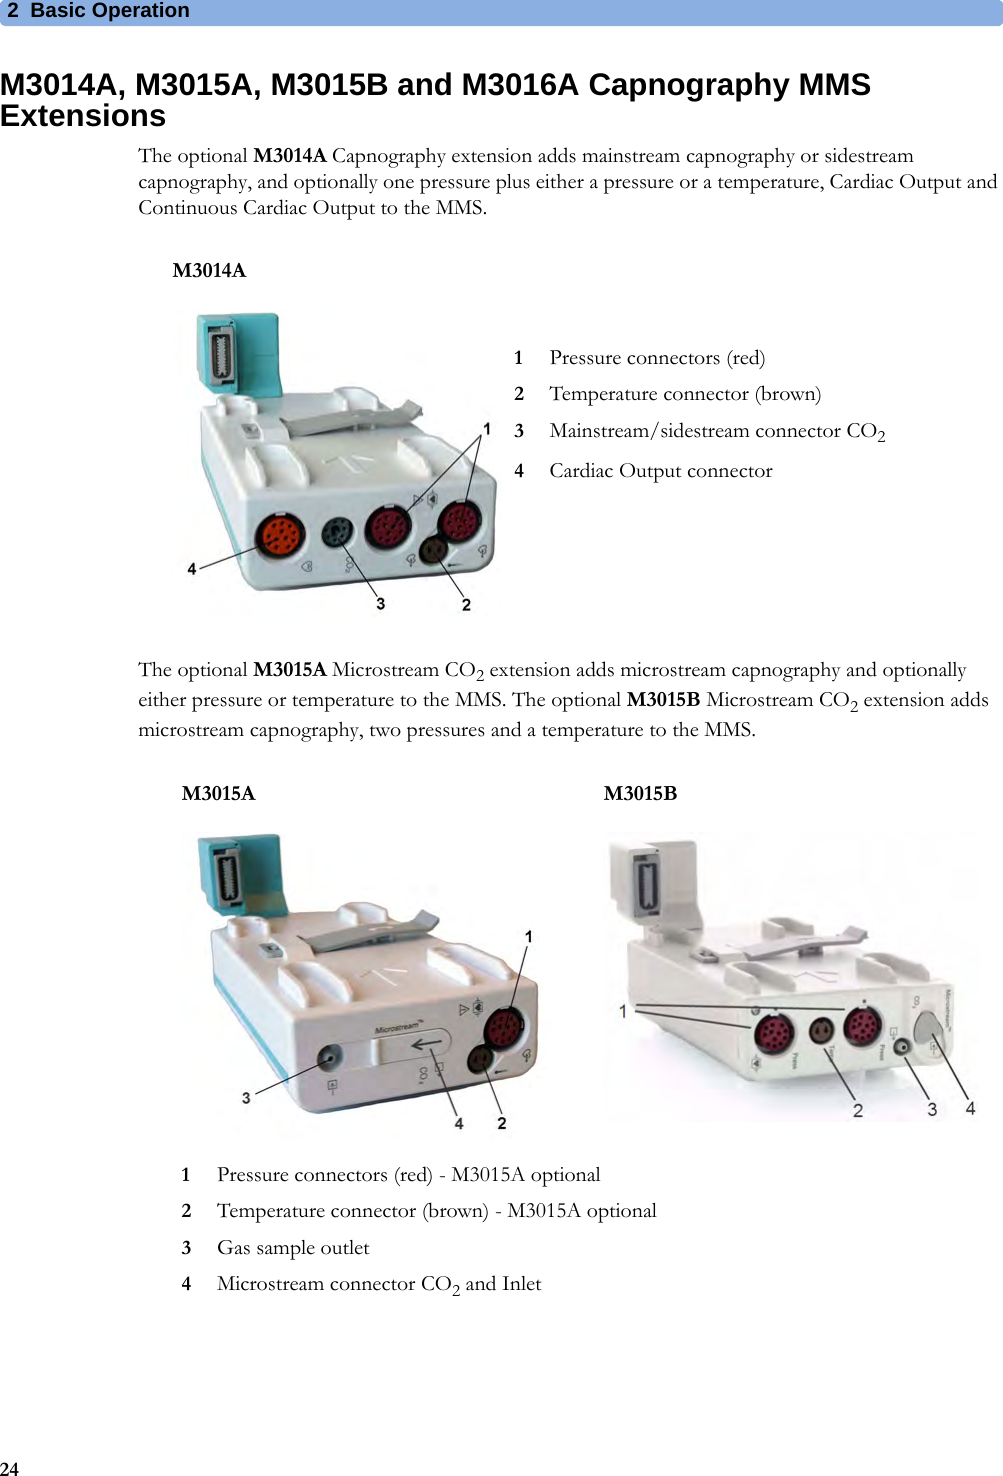 2 Basic Operation24M3014A, M3015A, M3015B and M3016A Capnography MMS ExtensionsThe optional M3014A Capnography extension adds mainstream capnography or sidestream capnography, and optionally one pressure plus either a pressure or a temperature, Cardiac Output and Continuous Cardiac Output to the MMS.The optional M3015A Microstream CO2 extension adds microstream capnography and optionally either pressure or temperature to the MMS. The optional M3015B Microstream CO2 extension adds microstream capnography, two pressures and a temperature to the MMS.M3014A1Pressure connectors (red)2Temperature connector (brown)3Mainstream/sidestream connector CO24Cardiac Output connectorM3015A M3015B1Pressure connectors (red) - M3015A optional2Temperature connector (brown) - M3015A optional3Gas sample outlet4Microstream connector CO2 and Inlet